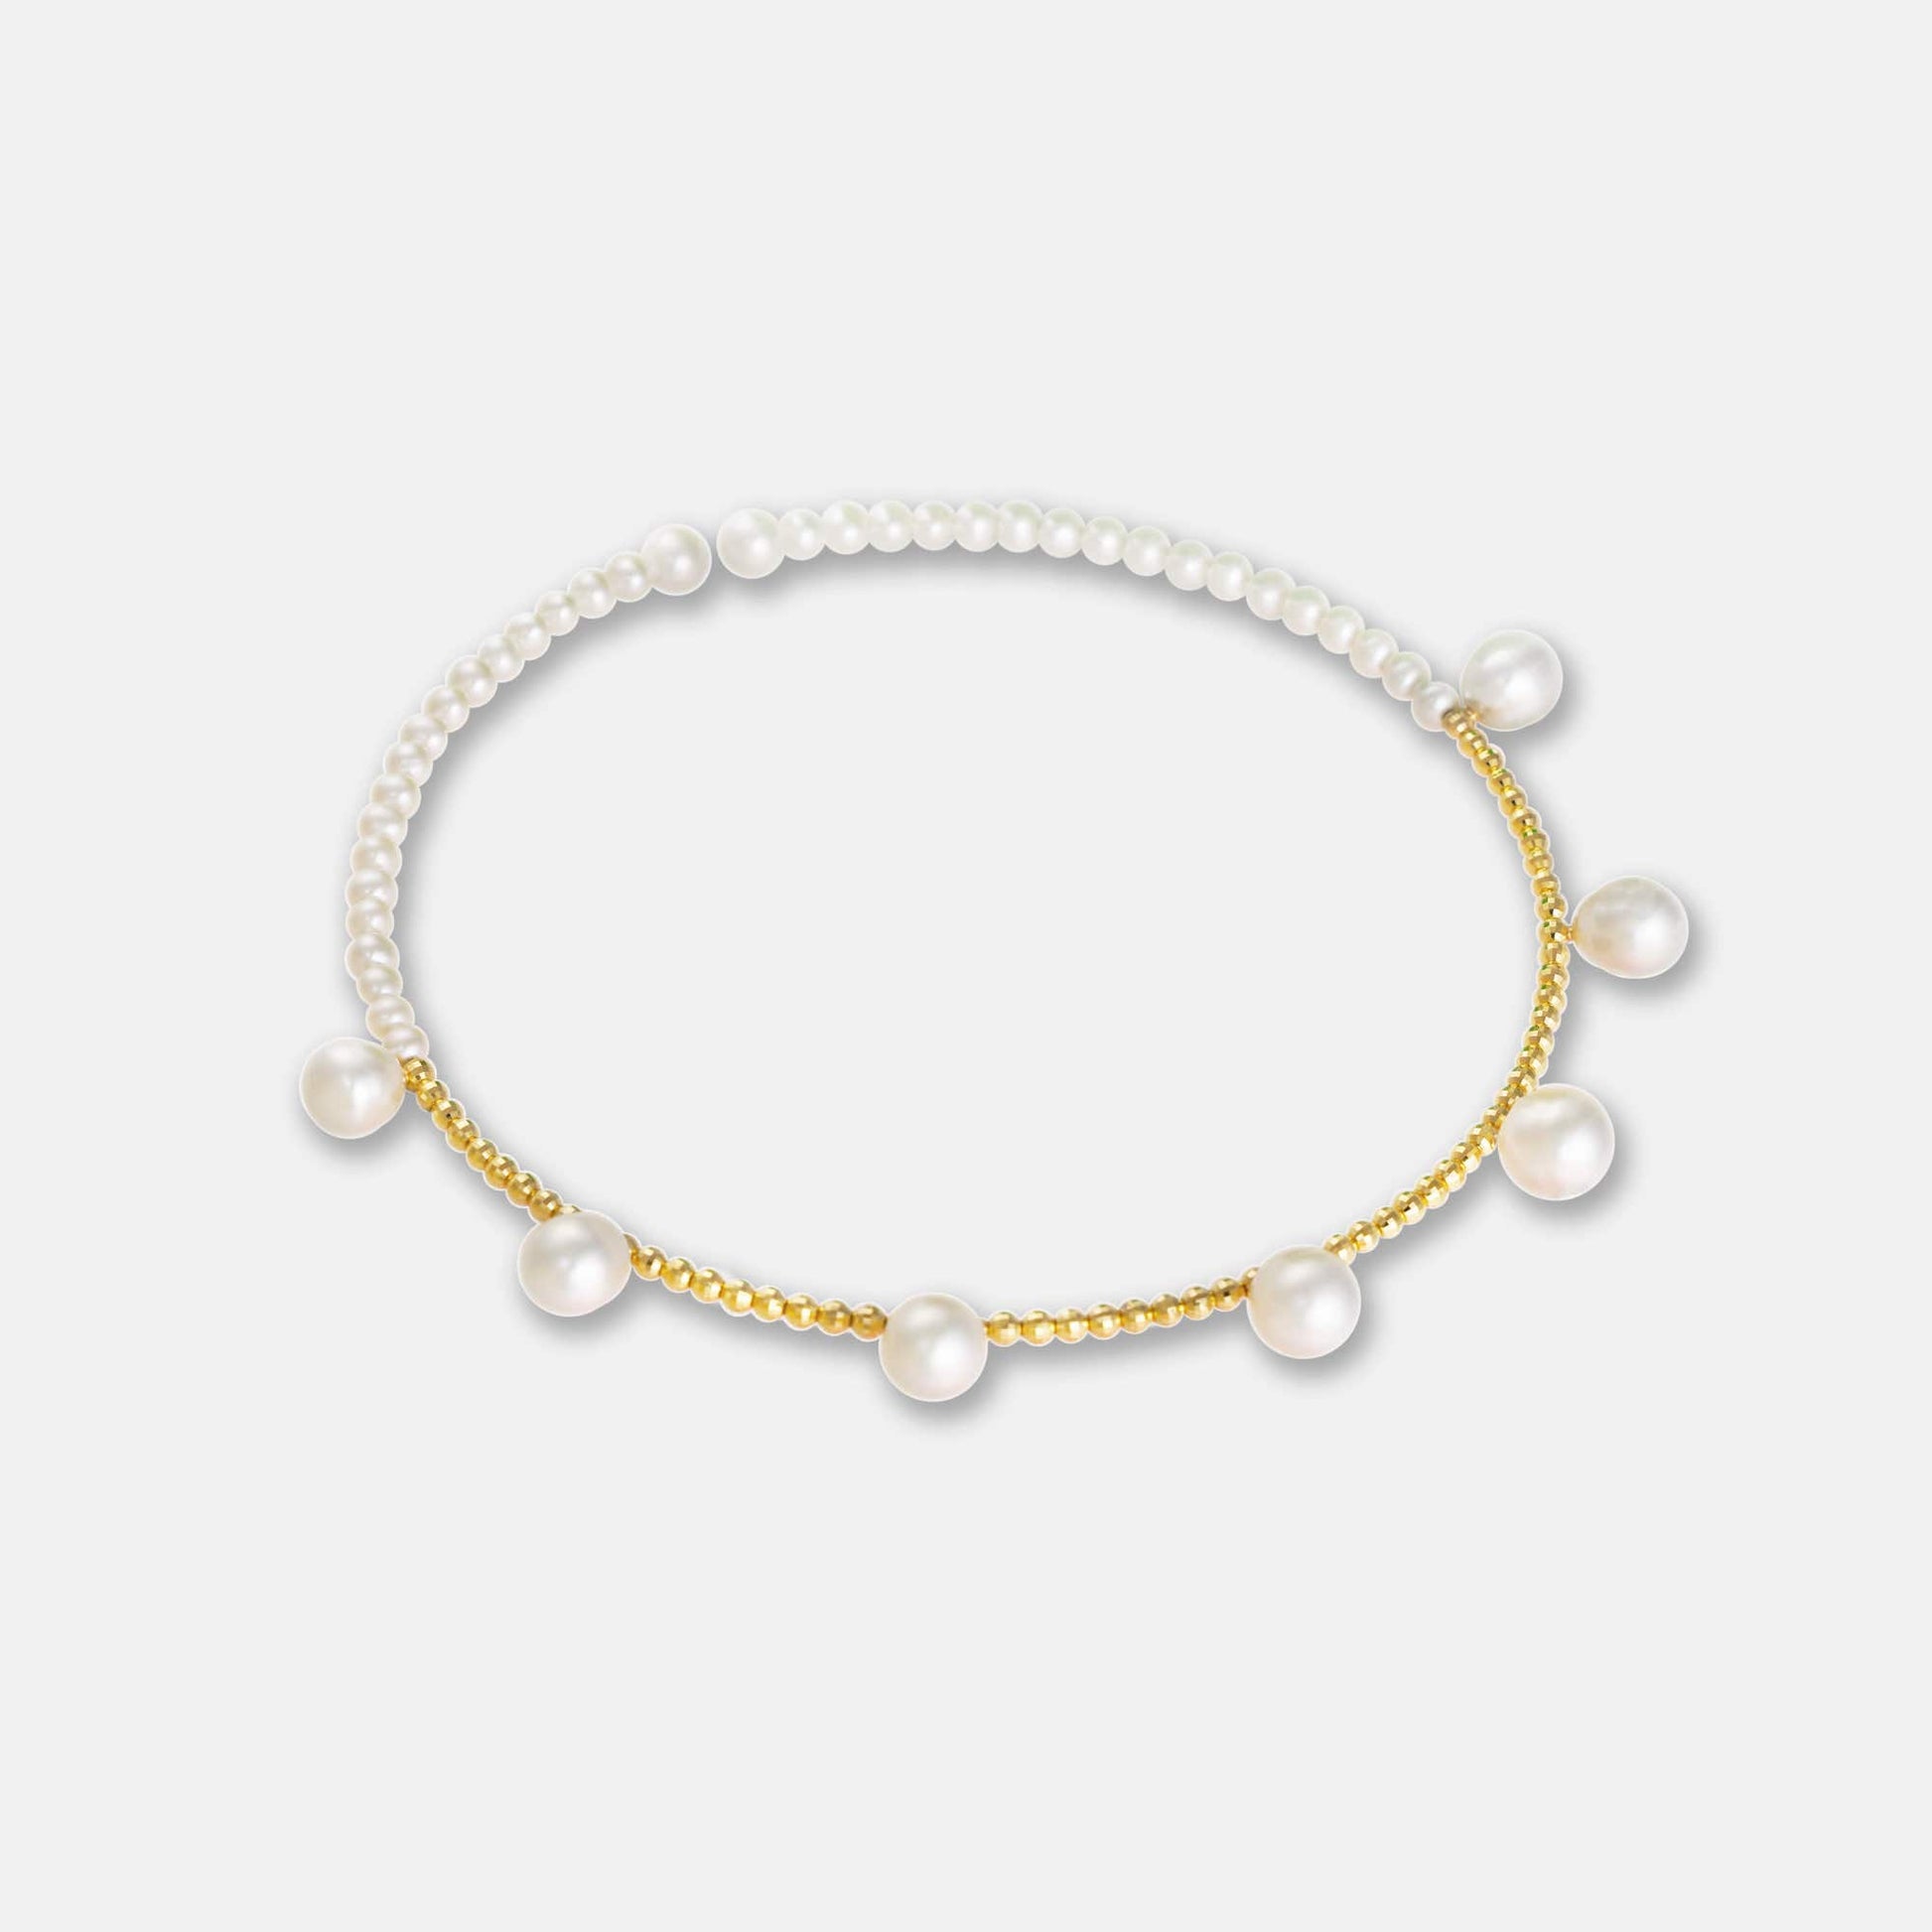 Embrace sophistication with a Pearl Dot x Gold Choker, highlighting a pearl necklace accentuated by gold beads and pearls.